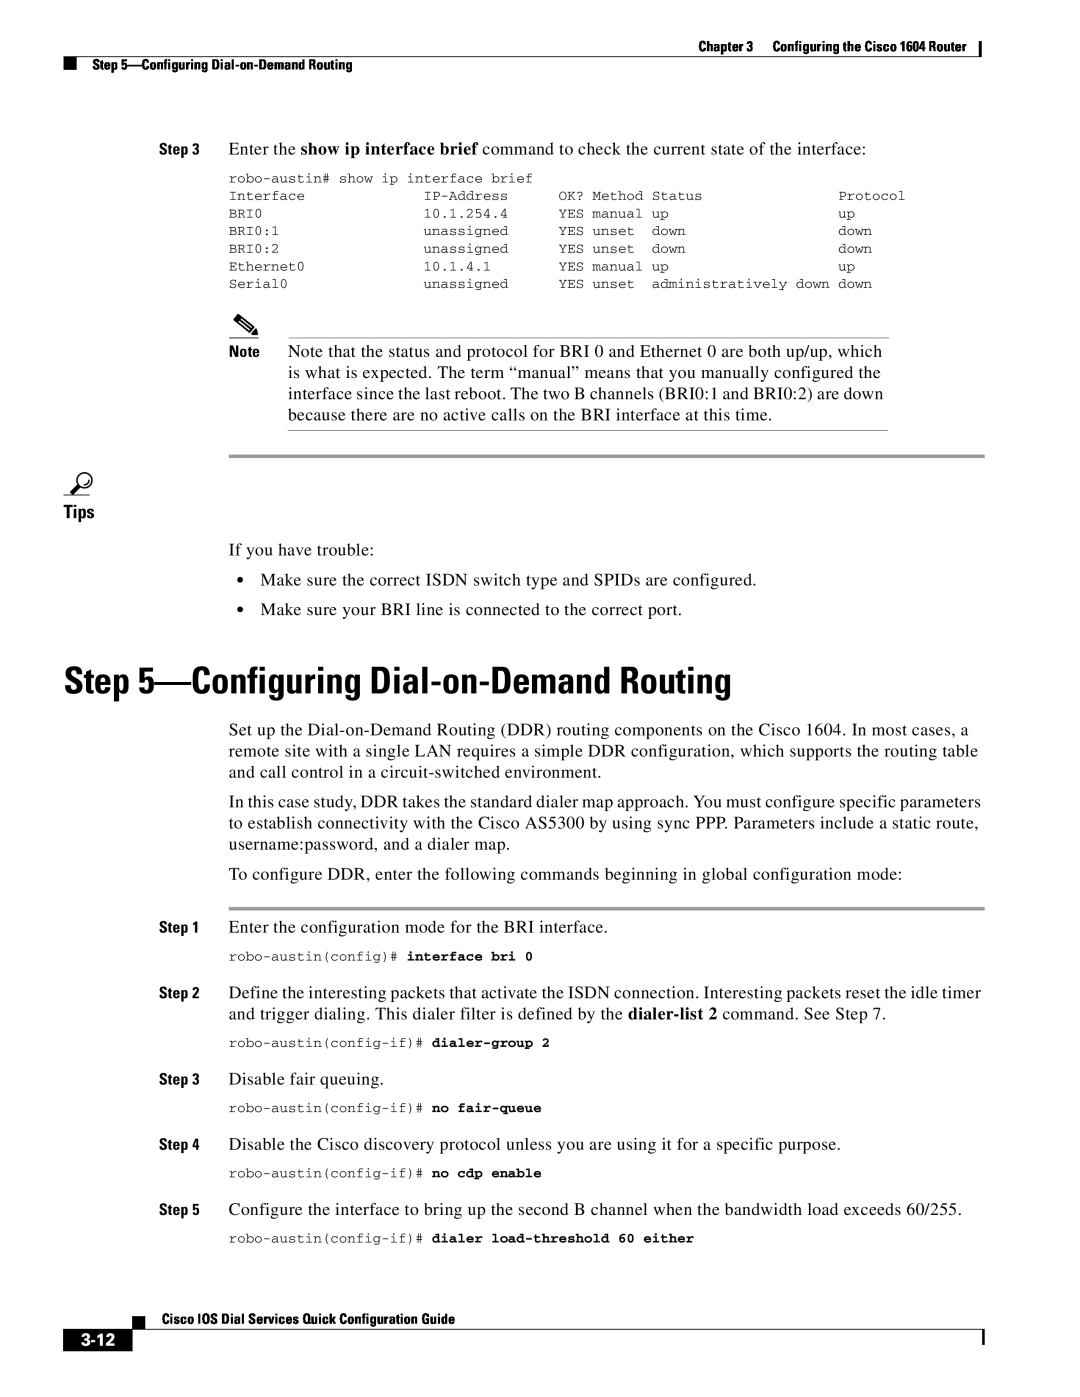 Cisco Systems 1604 manual Configuring Dial-on-Demand Routing, 3-12, Tips 